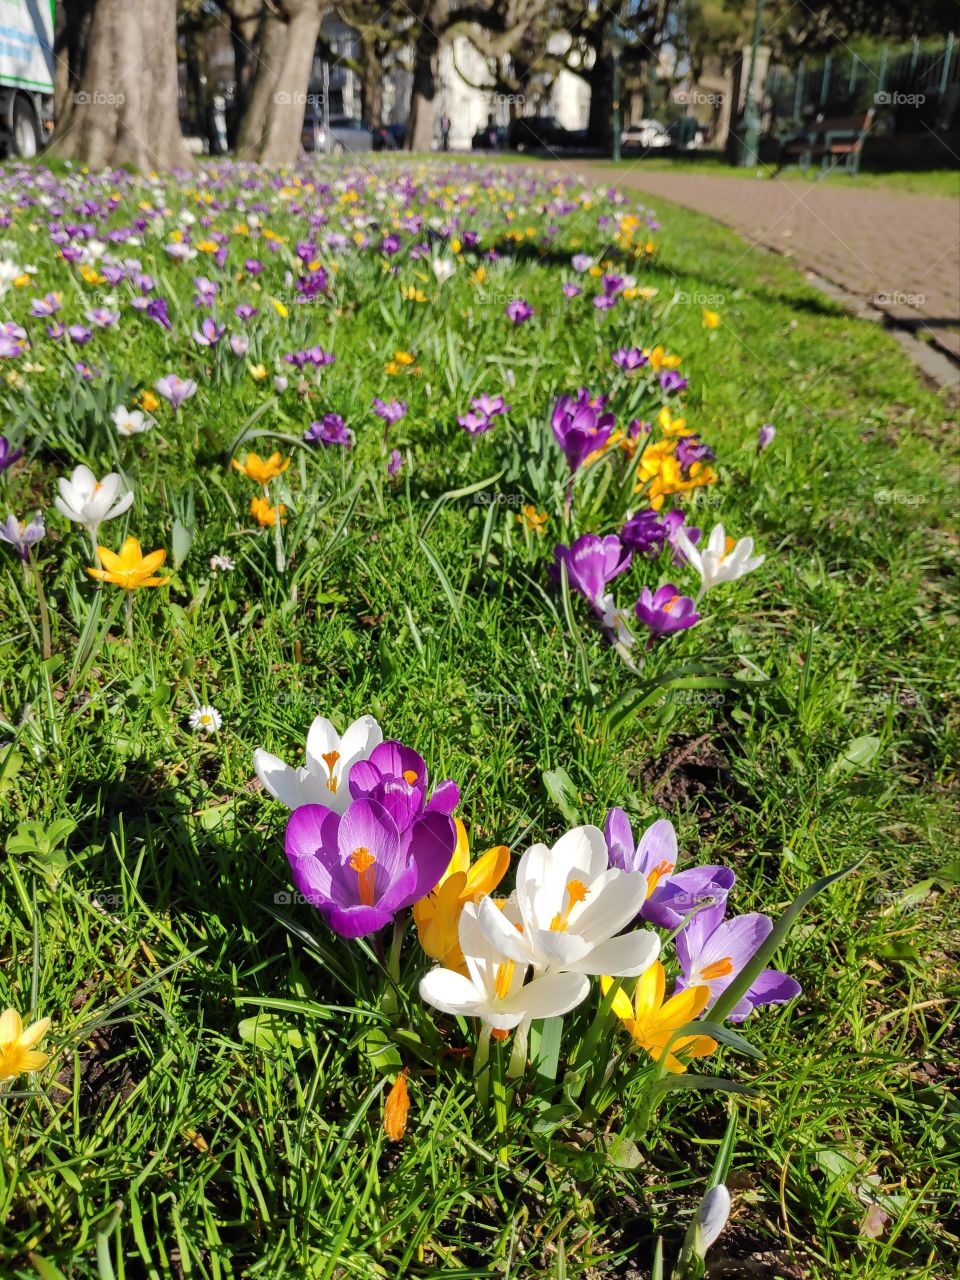 Crocuses at a sunny day in different colours